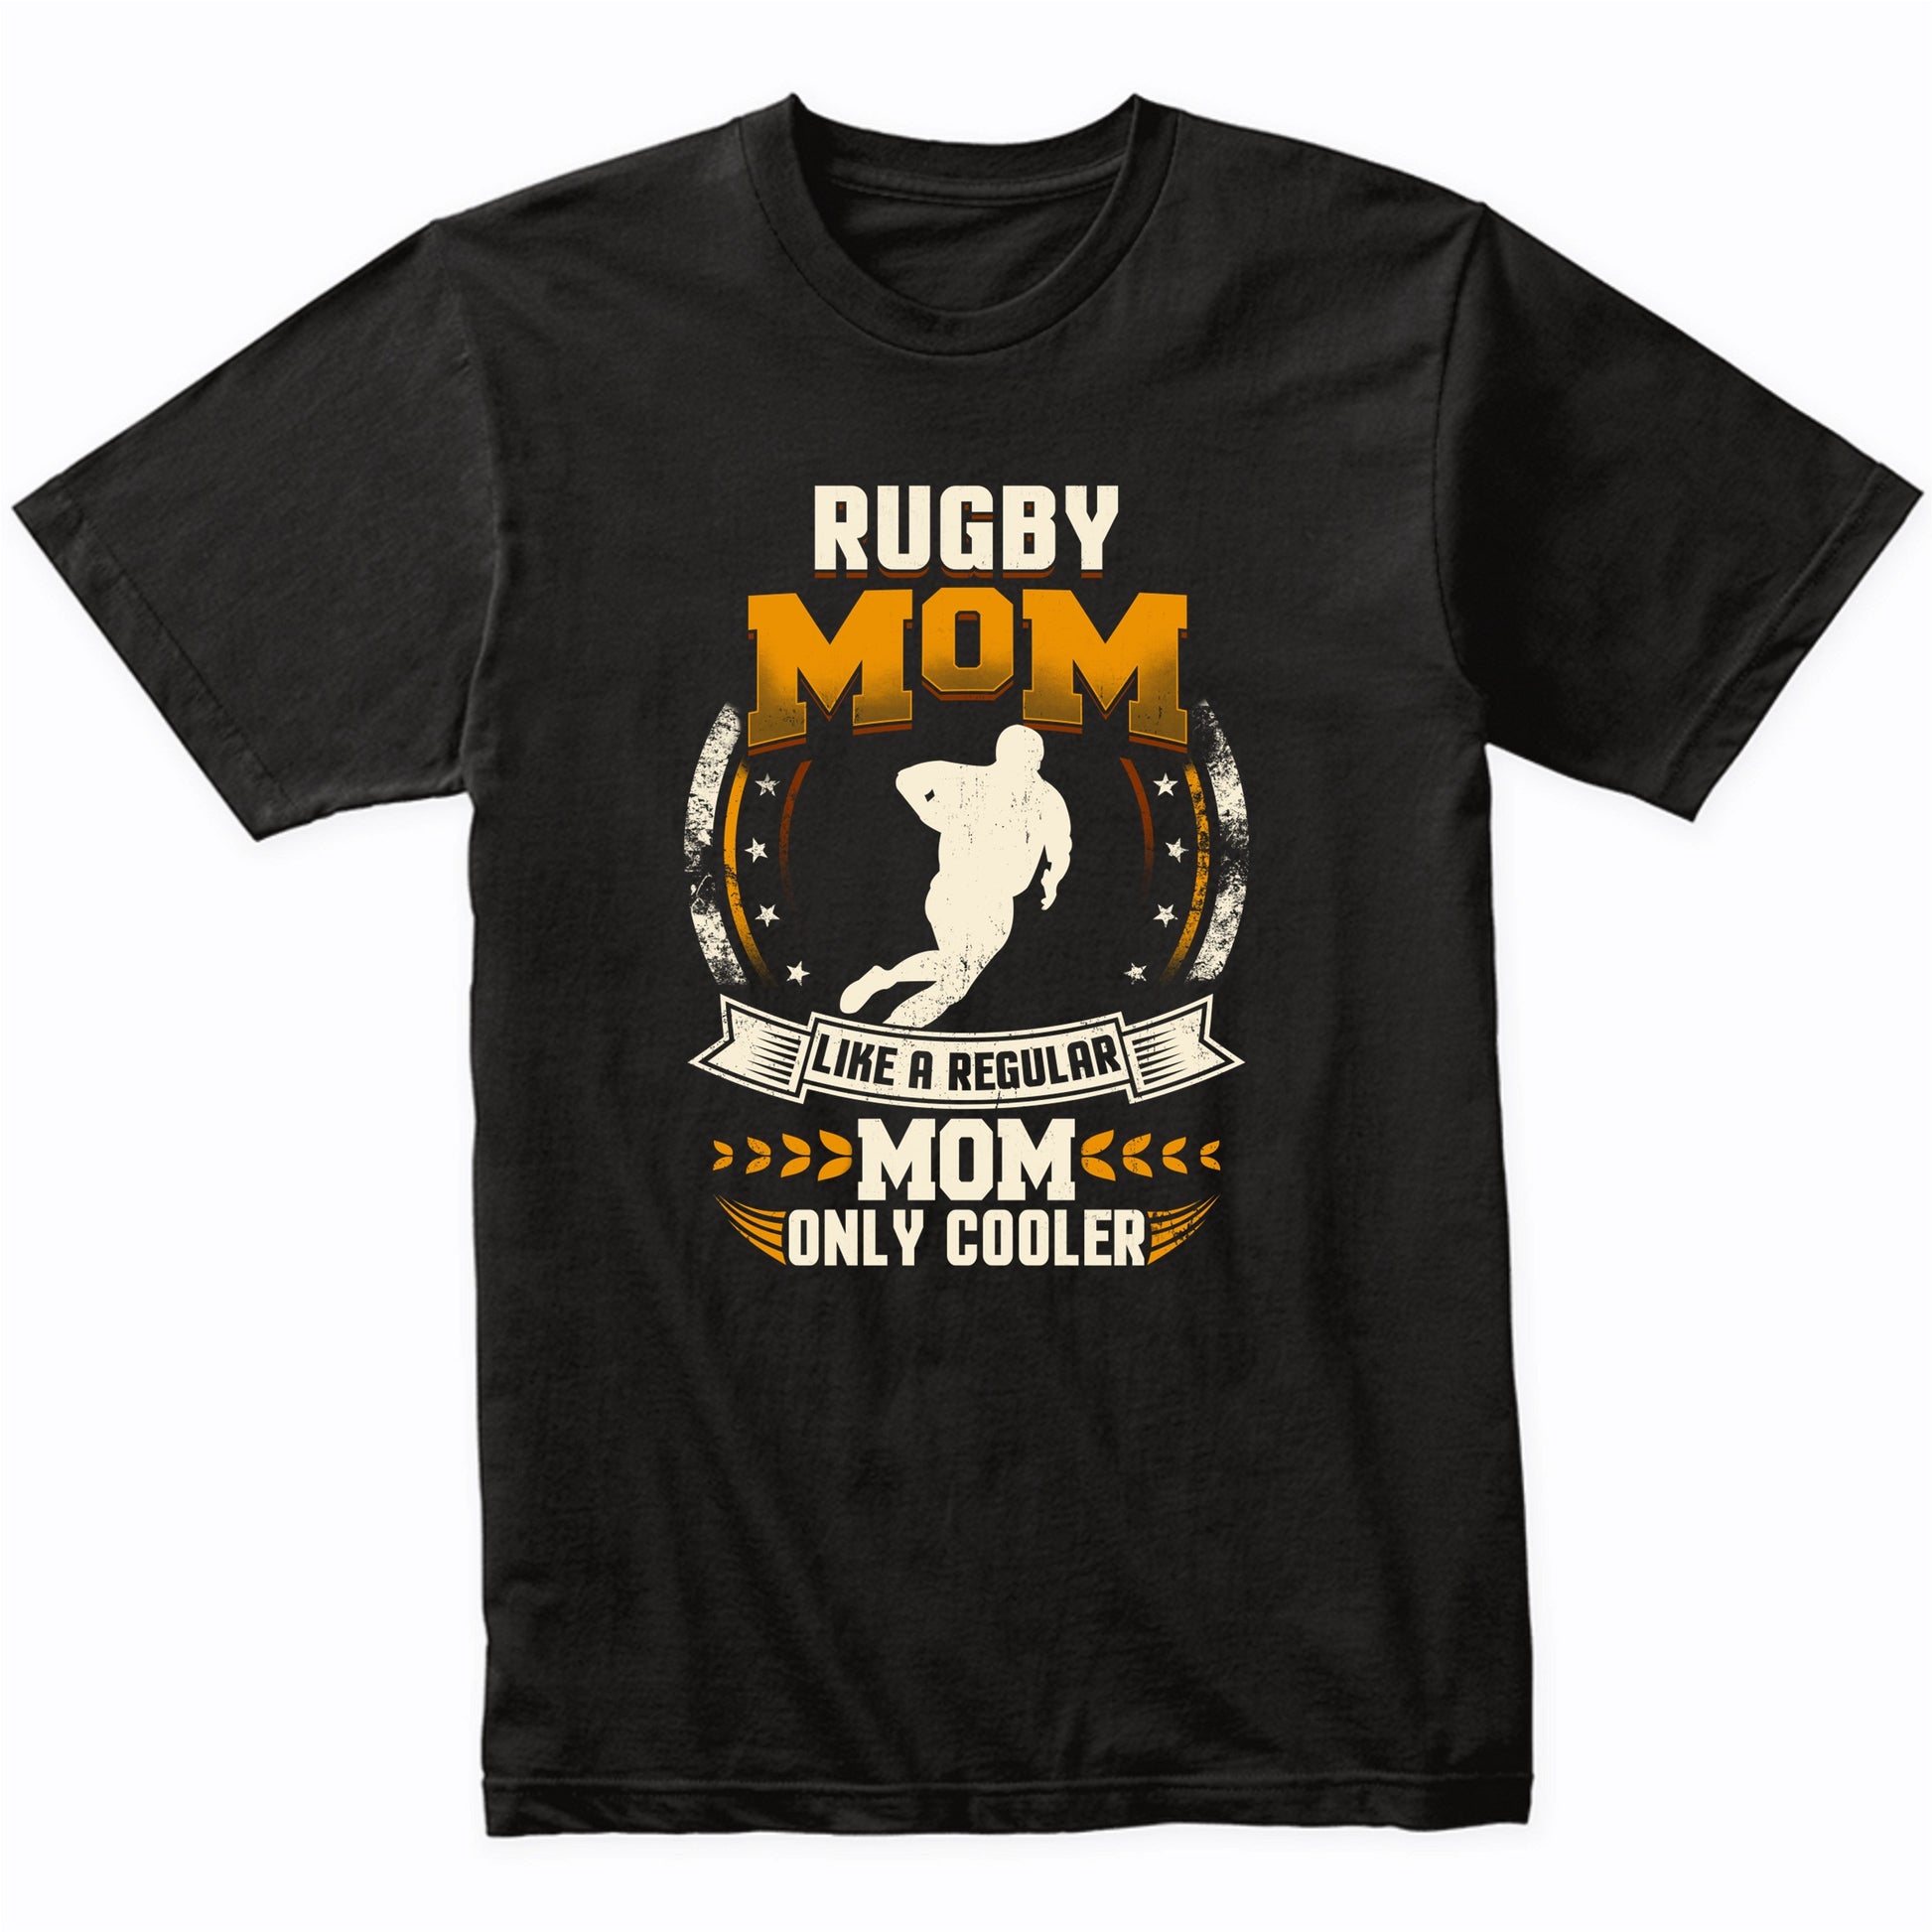 Rugby Mom Like A Regular Mom Only Cooler Funny T-Shirt